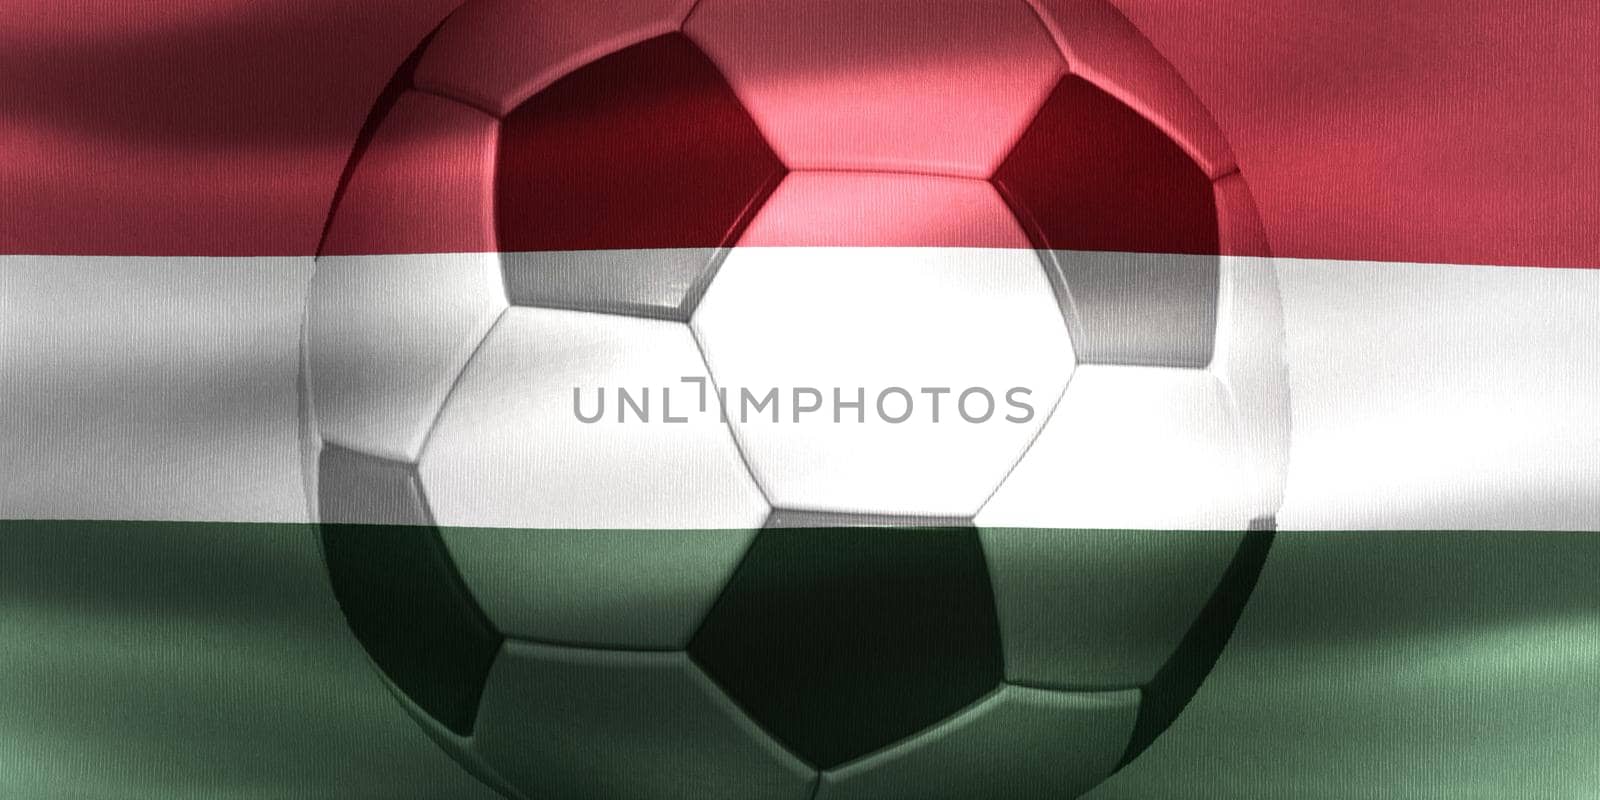 3D-Illustration of a Hungary flag with a soccer ball moving in the wind by MP_foto71